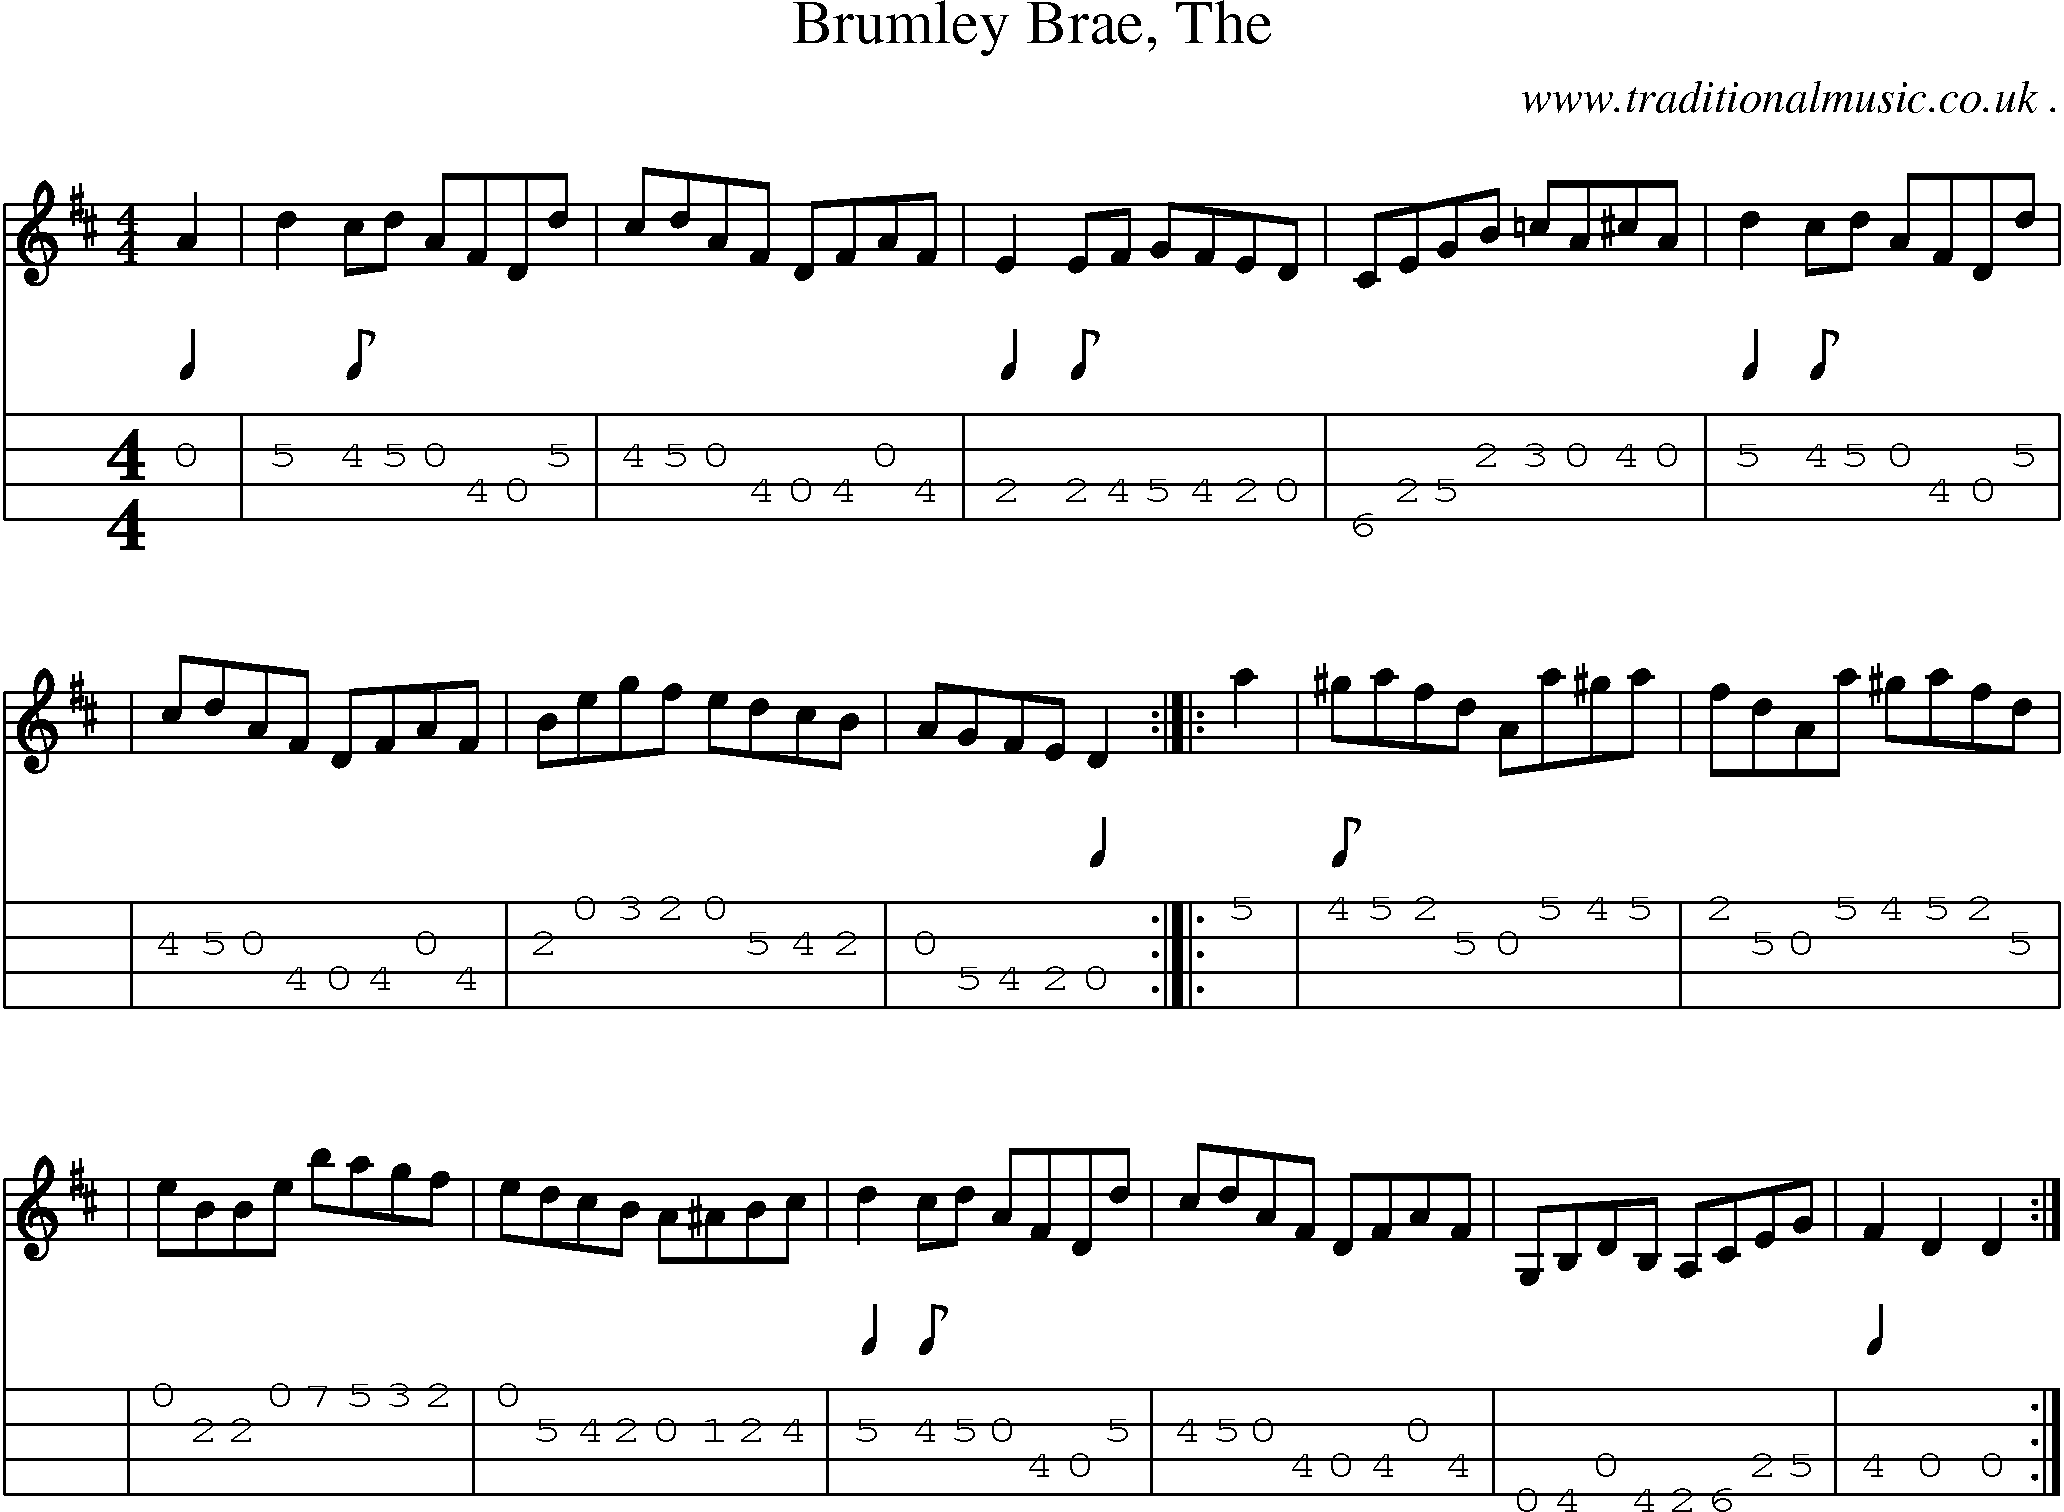 Sheet-music  score, Chords and Mandolin Tabs for Brumley Brae The